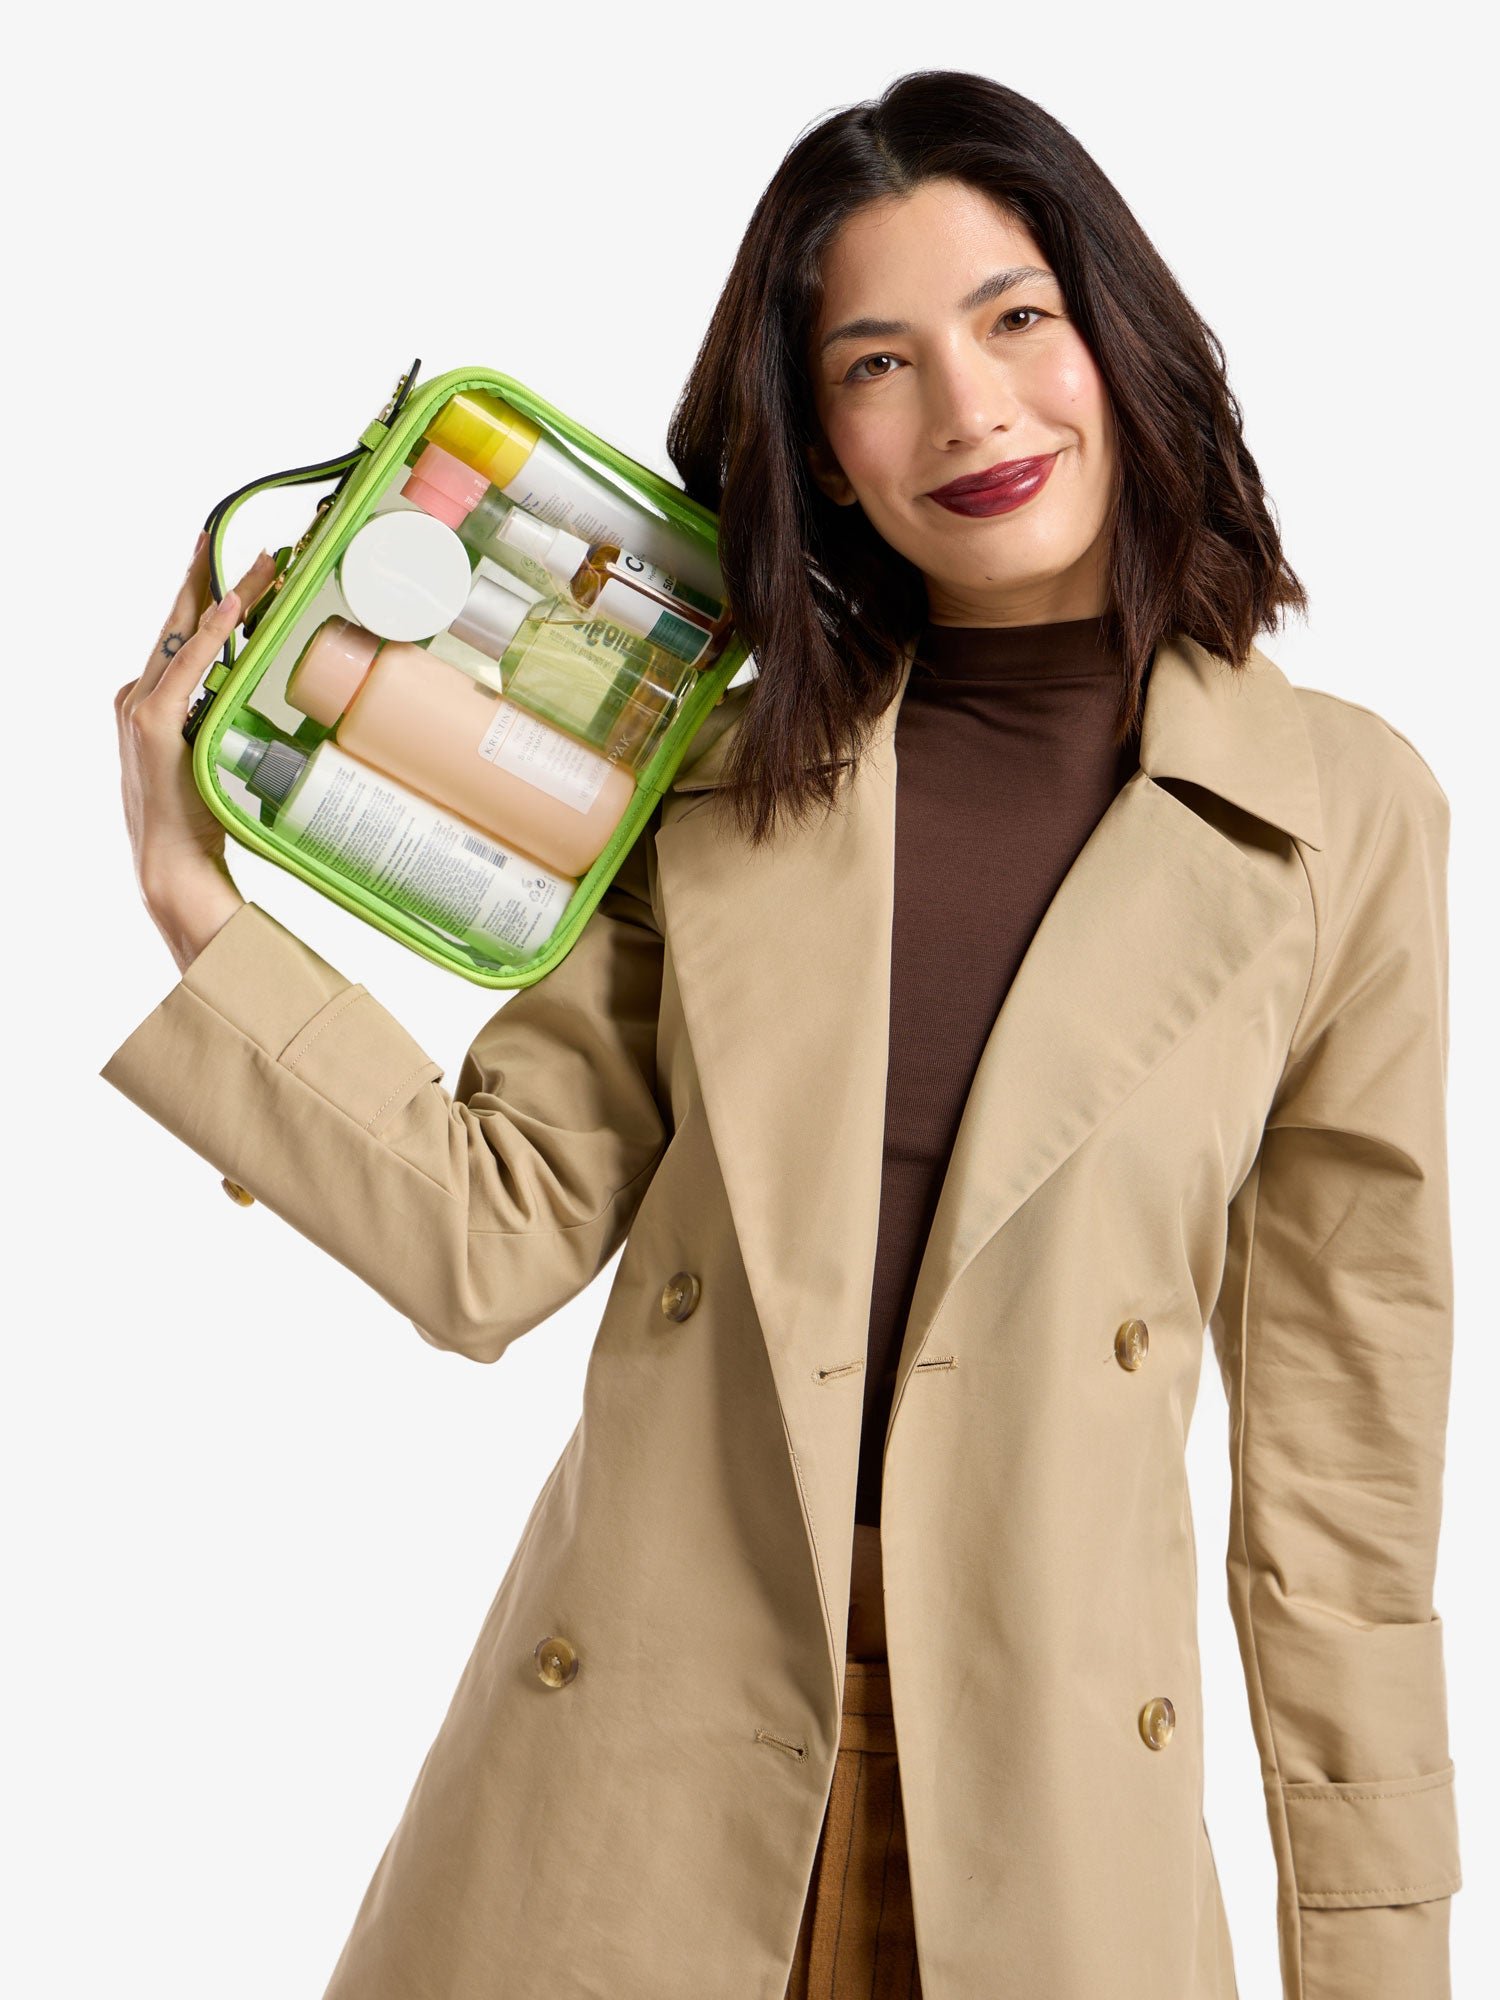 Model holding CALPAK medium clear cosmetic case in electric lime green